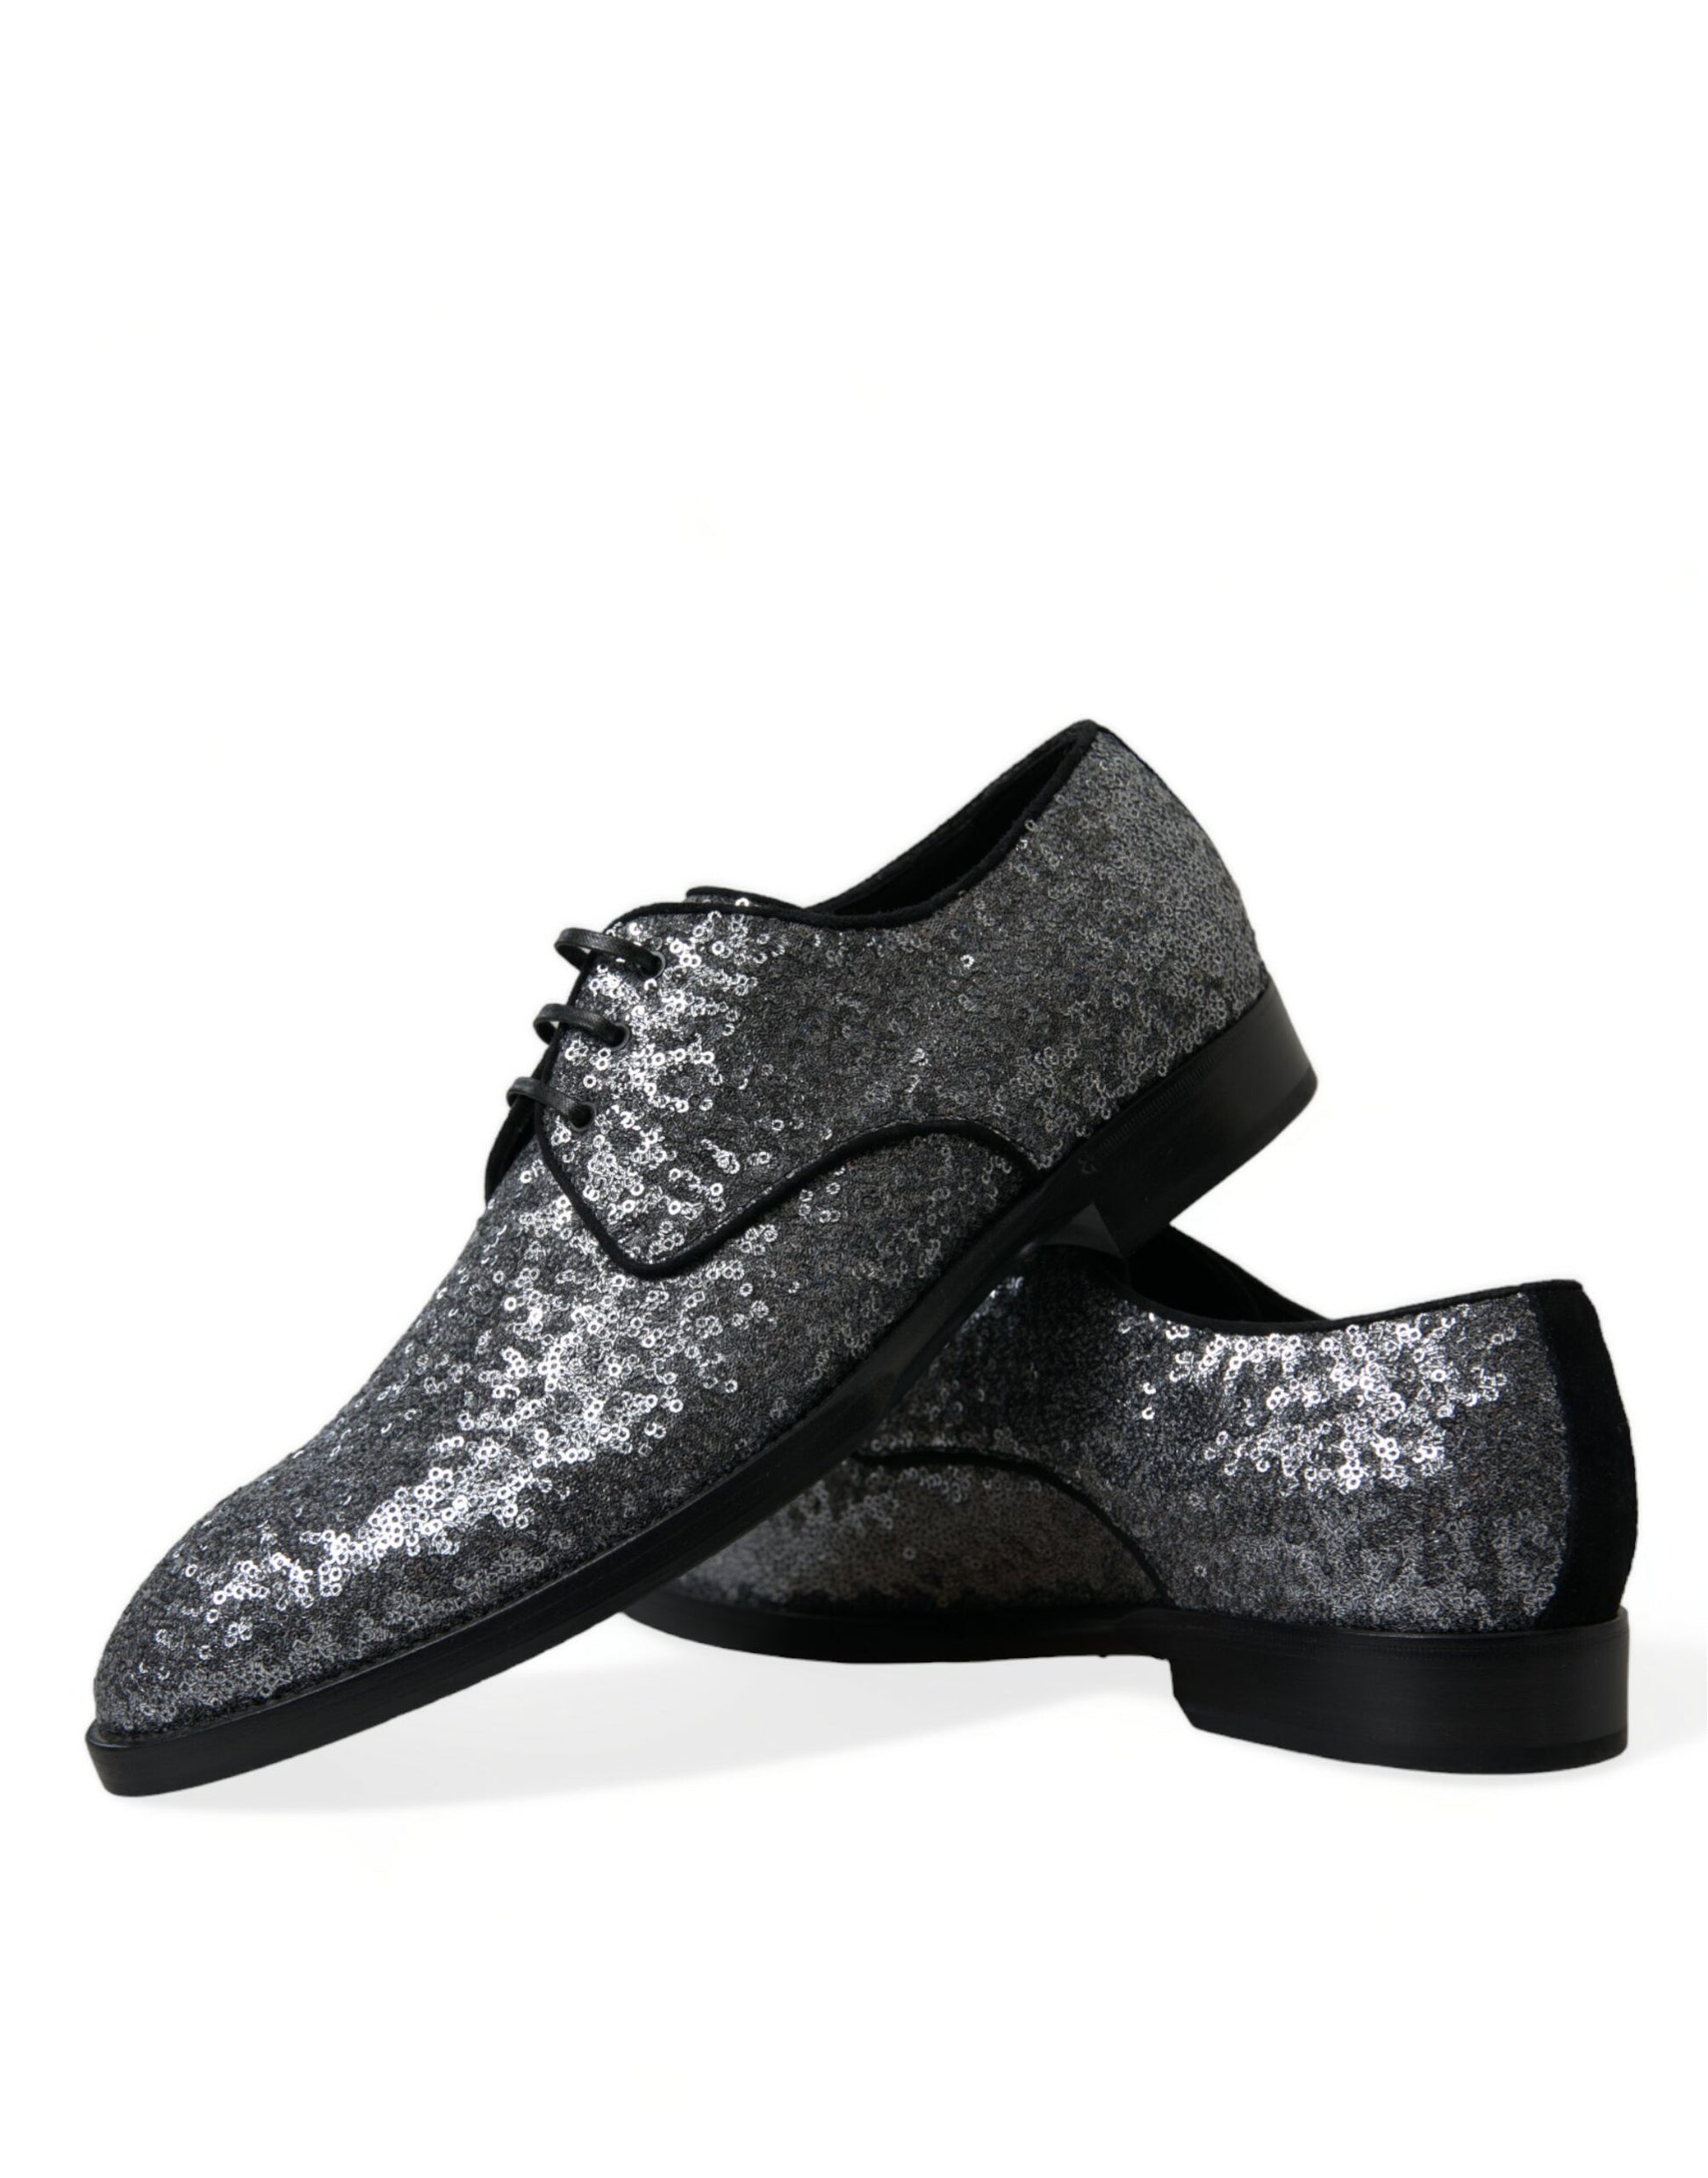 Exquisite Sequined Derby Dress Shoes